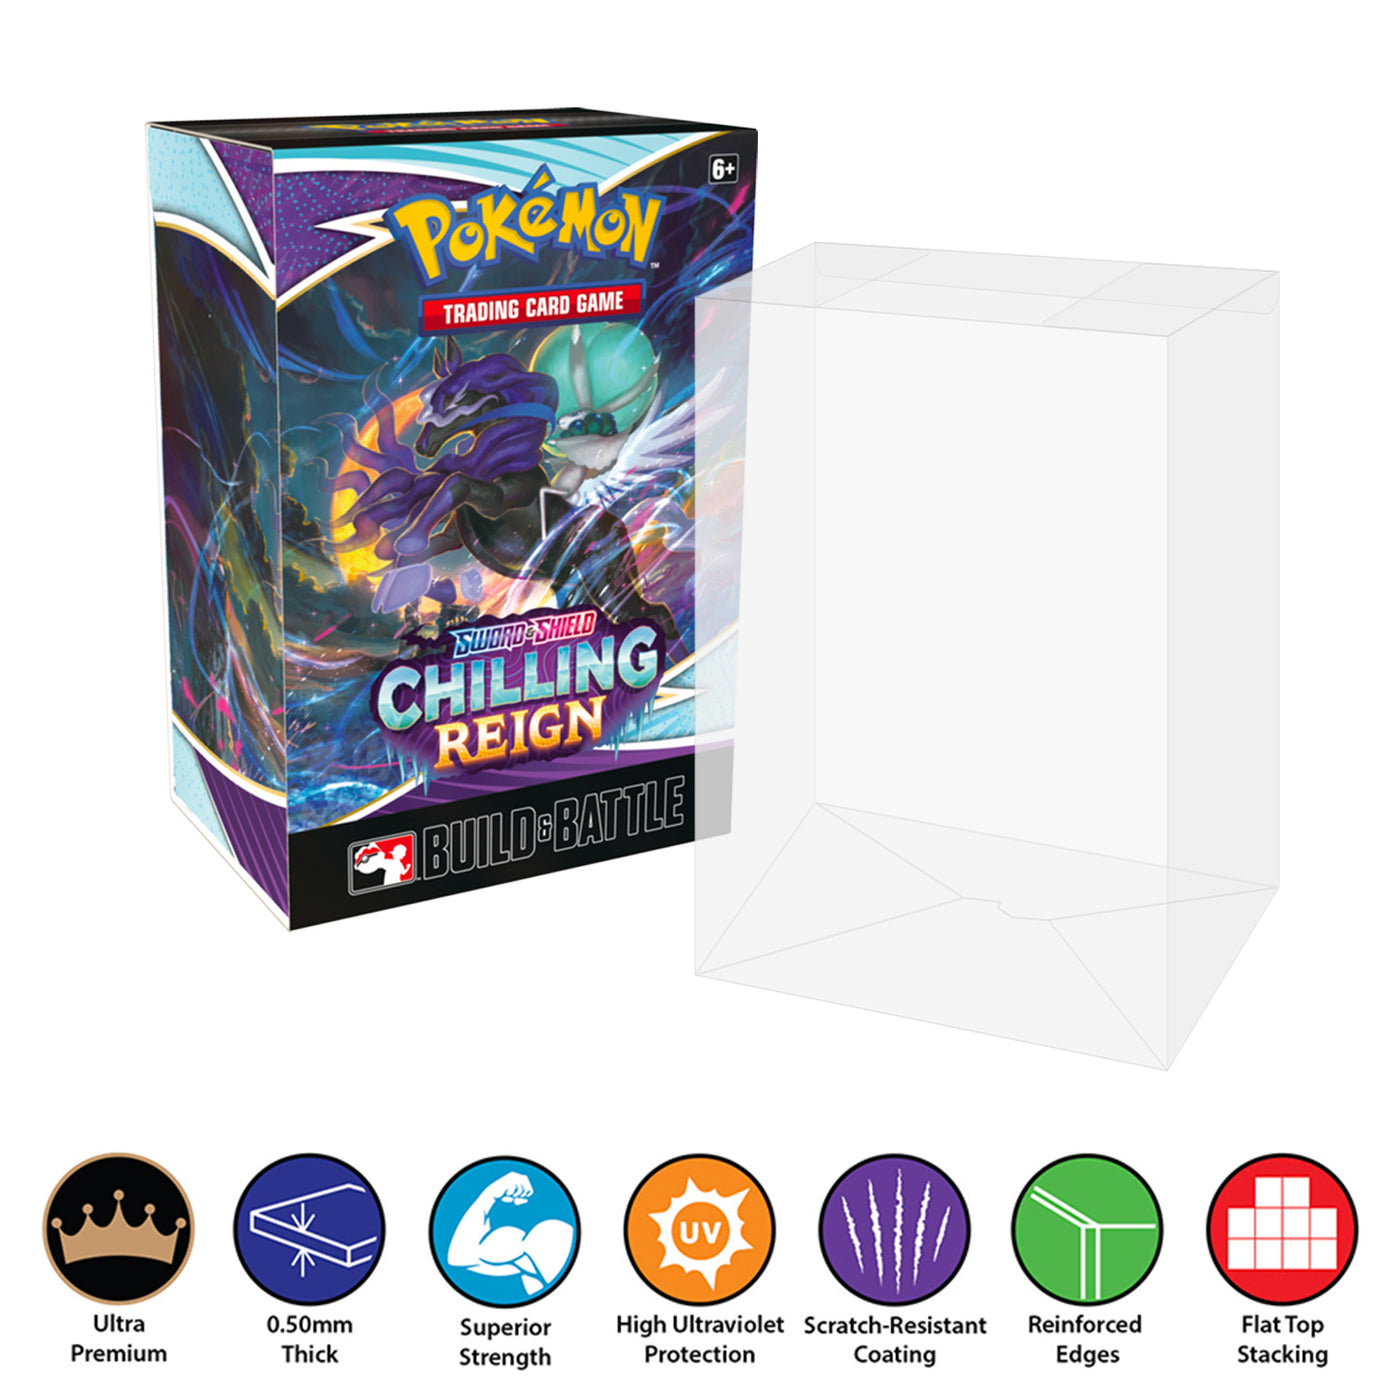 POKEMON TCG Single Build & Battle Box Protectors (50mm thick, UV & Scratch Resistant) 4.25h X 3w X 2d on The Protector Guide App by Display Geek